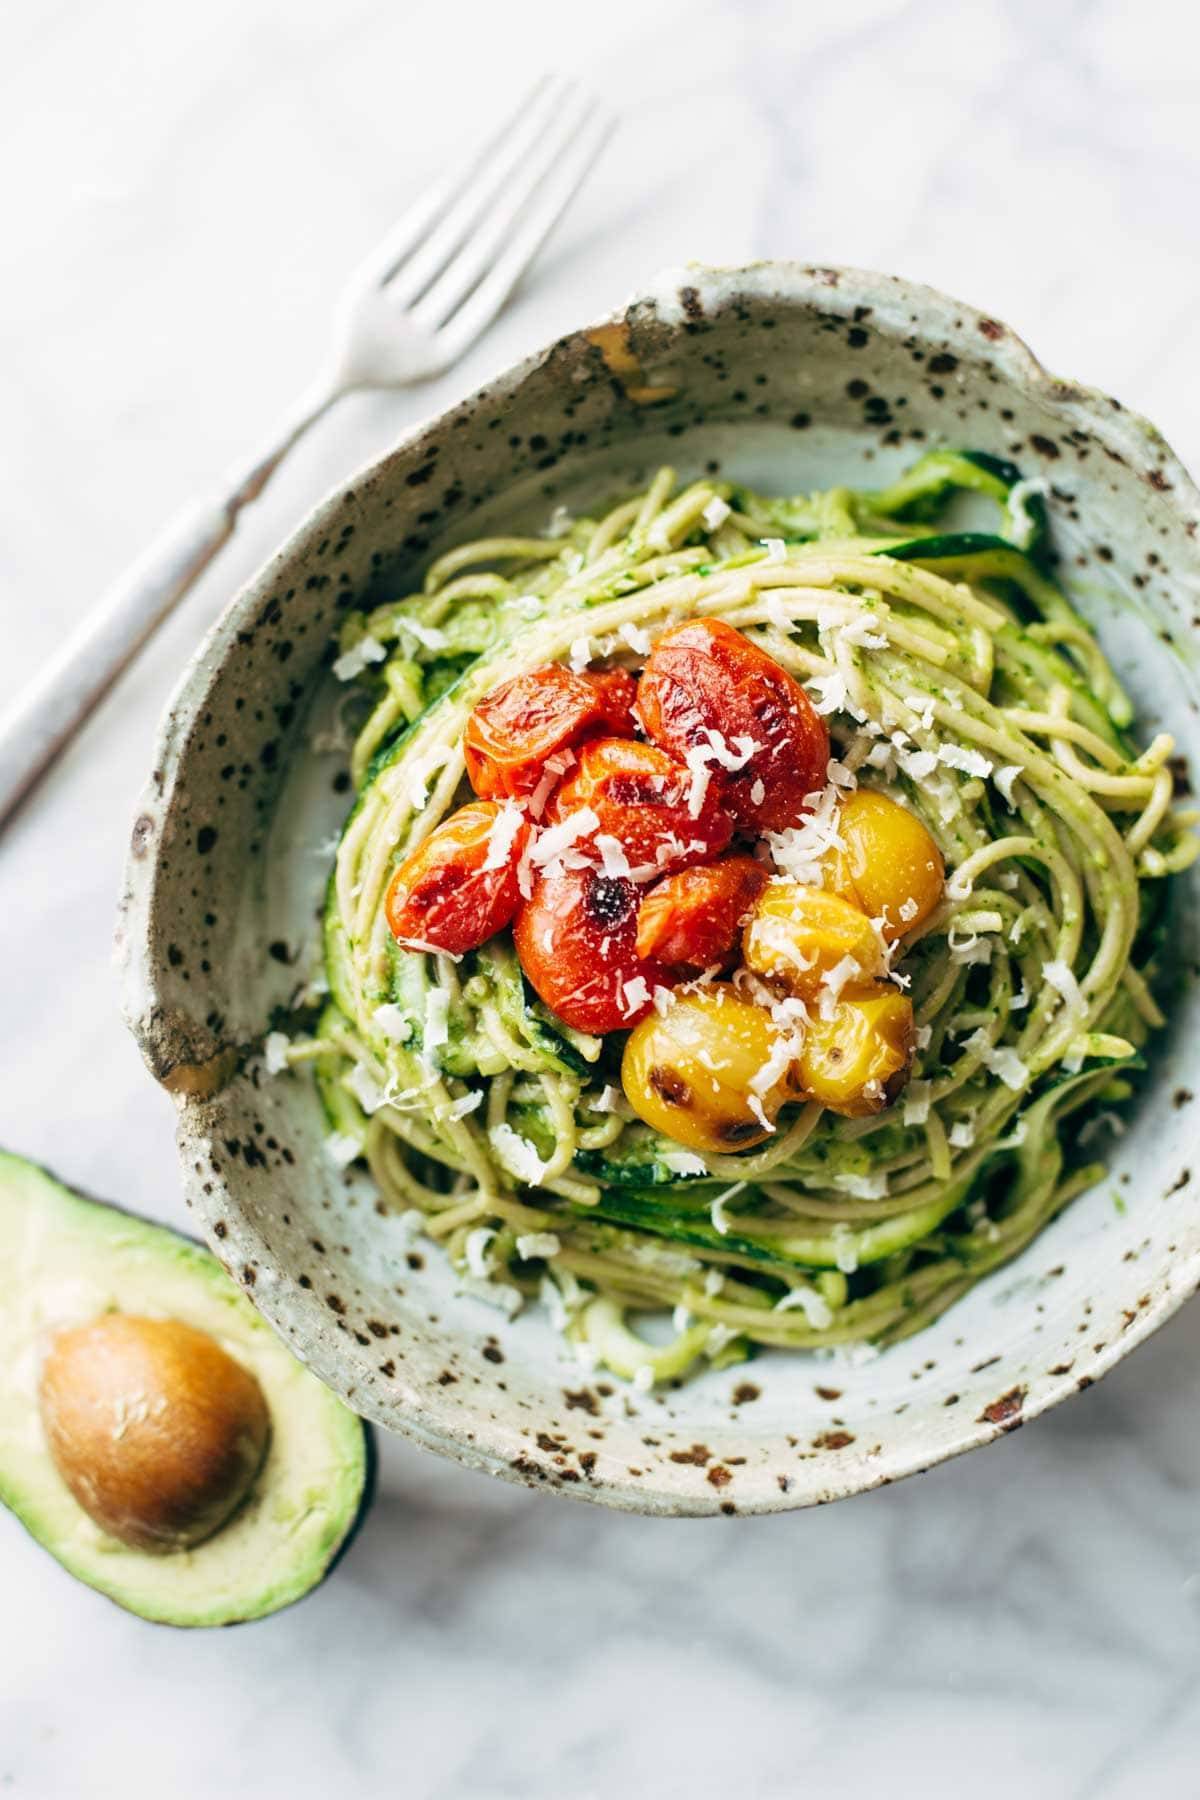 Burst Tomato and Zucchini Spaghetti in a speckled bowl with a fork.